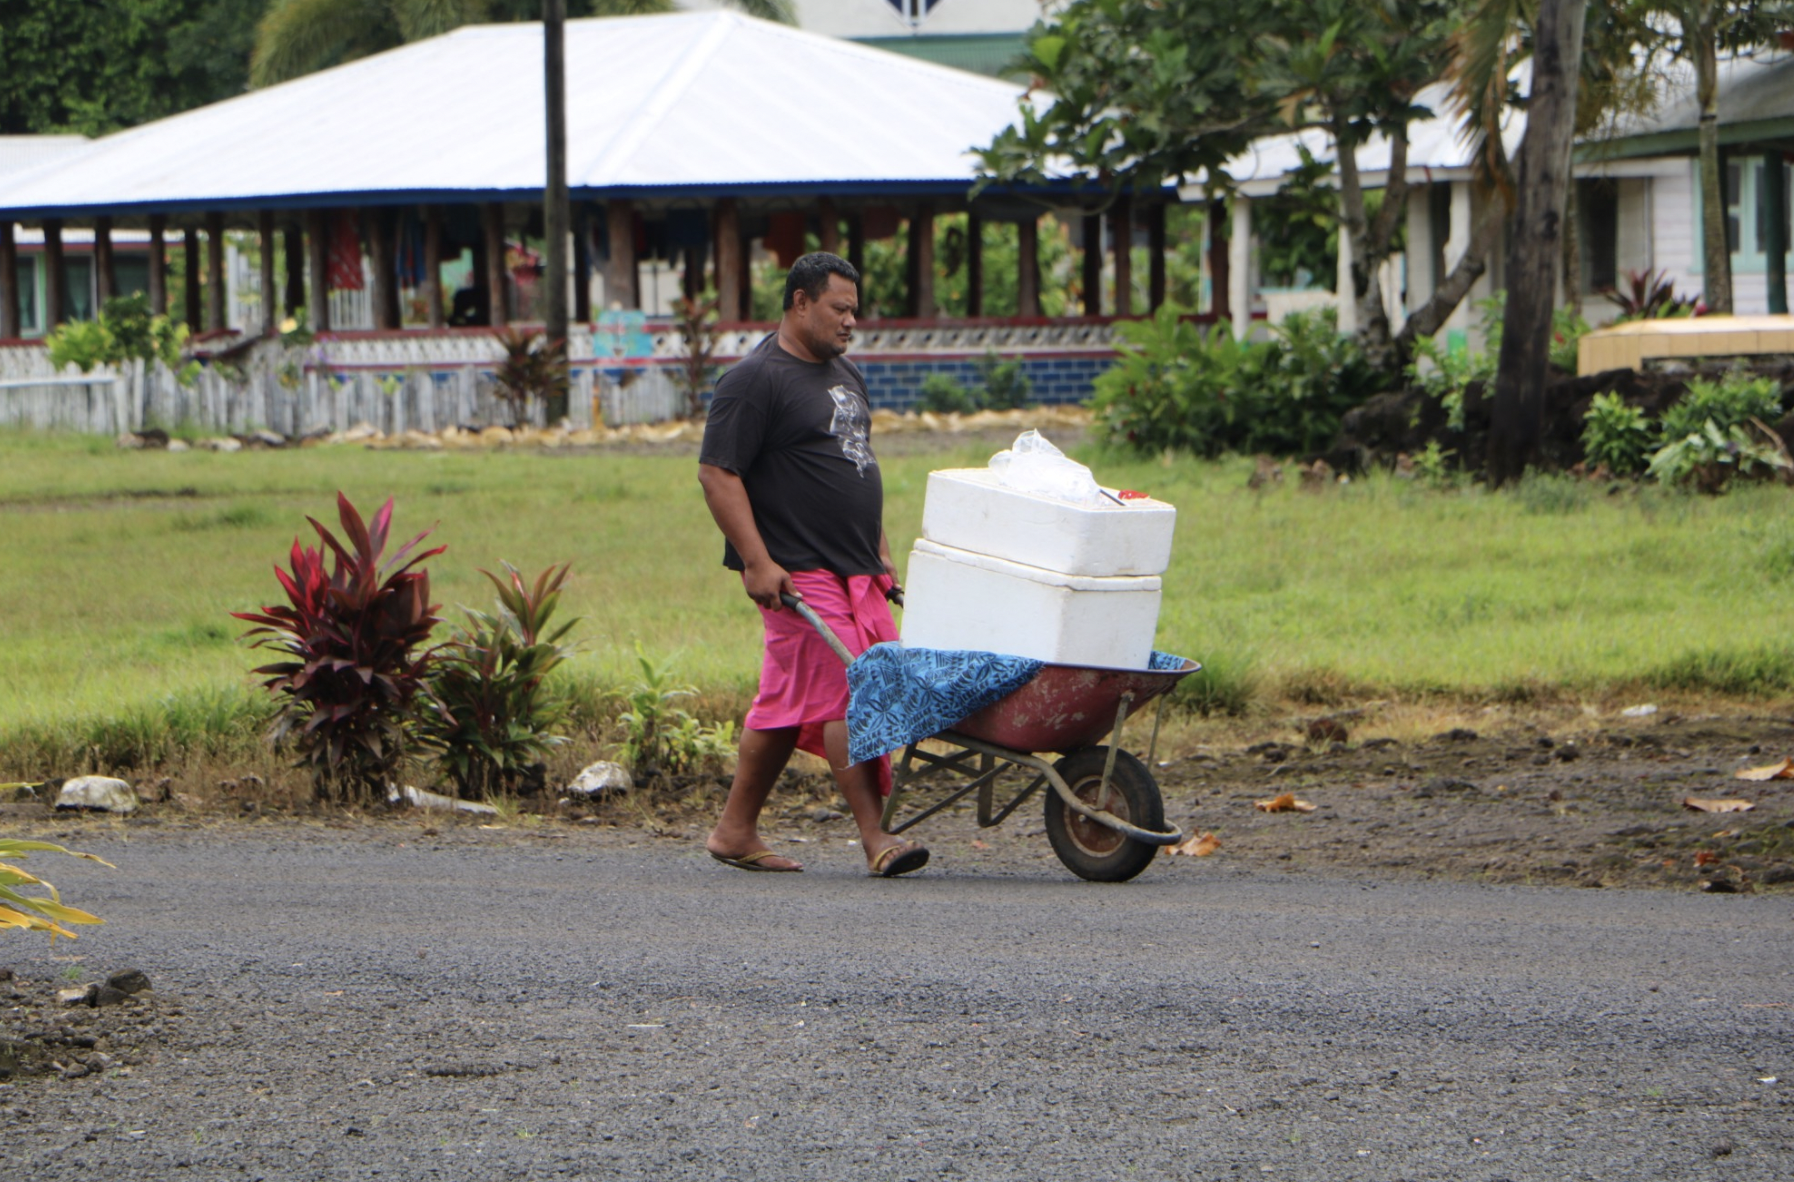 A street vendor hawking his wares through the village of Falease’ela, Lefaga. It’s people like him who work in the informal sector that any Social Protection mechanism should seek to address first. Photo: UNDP Samoa/L.Lesa